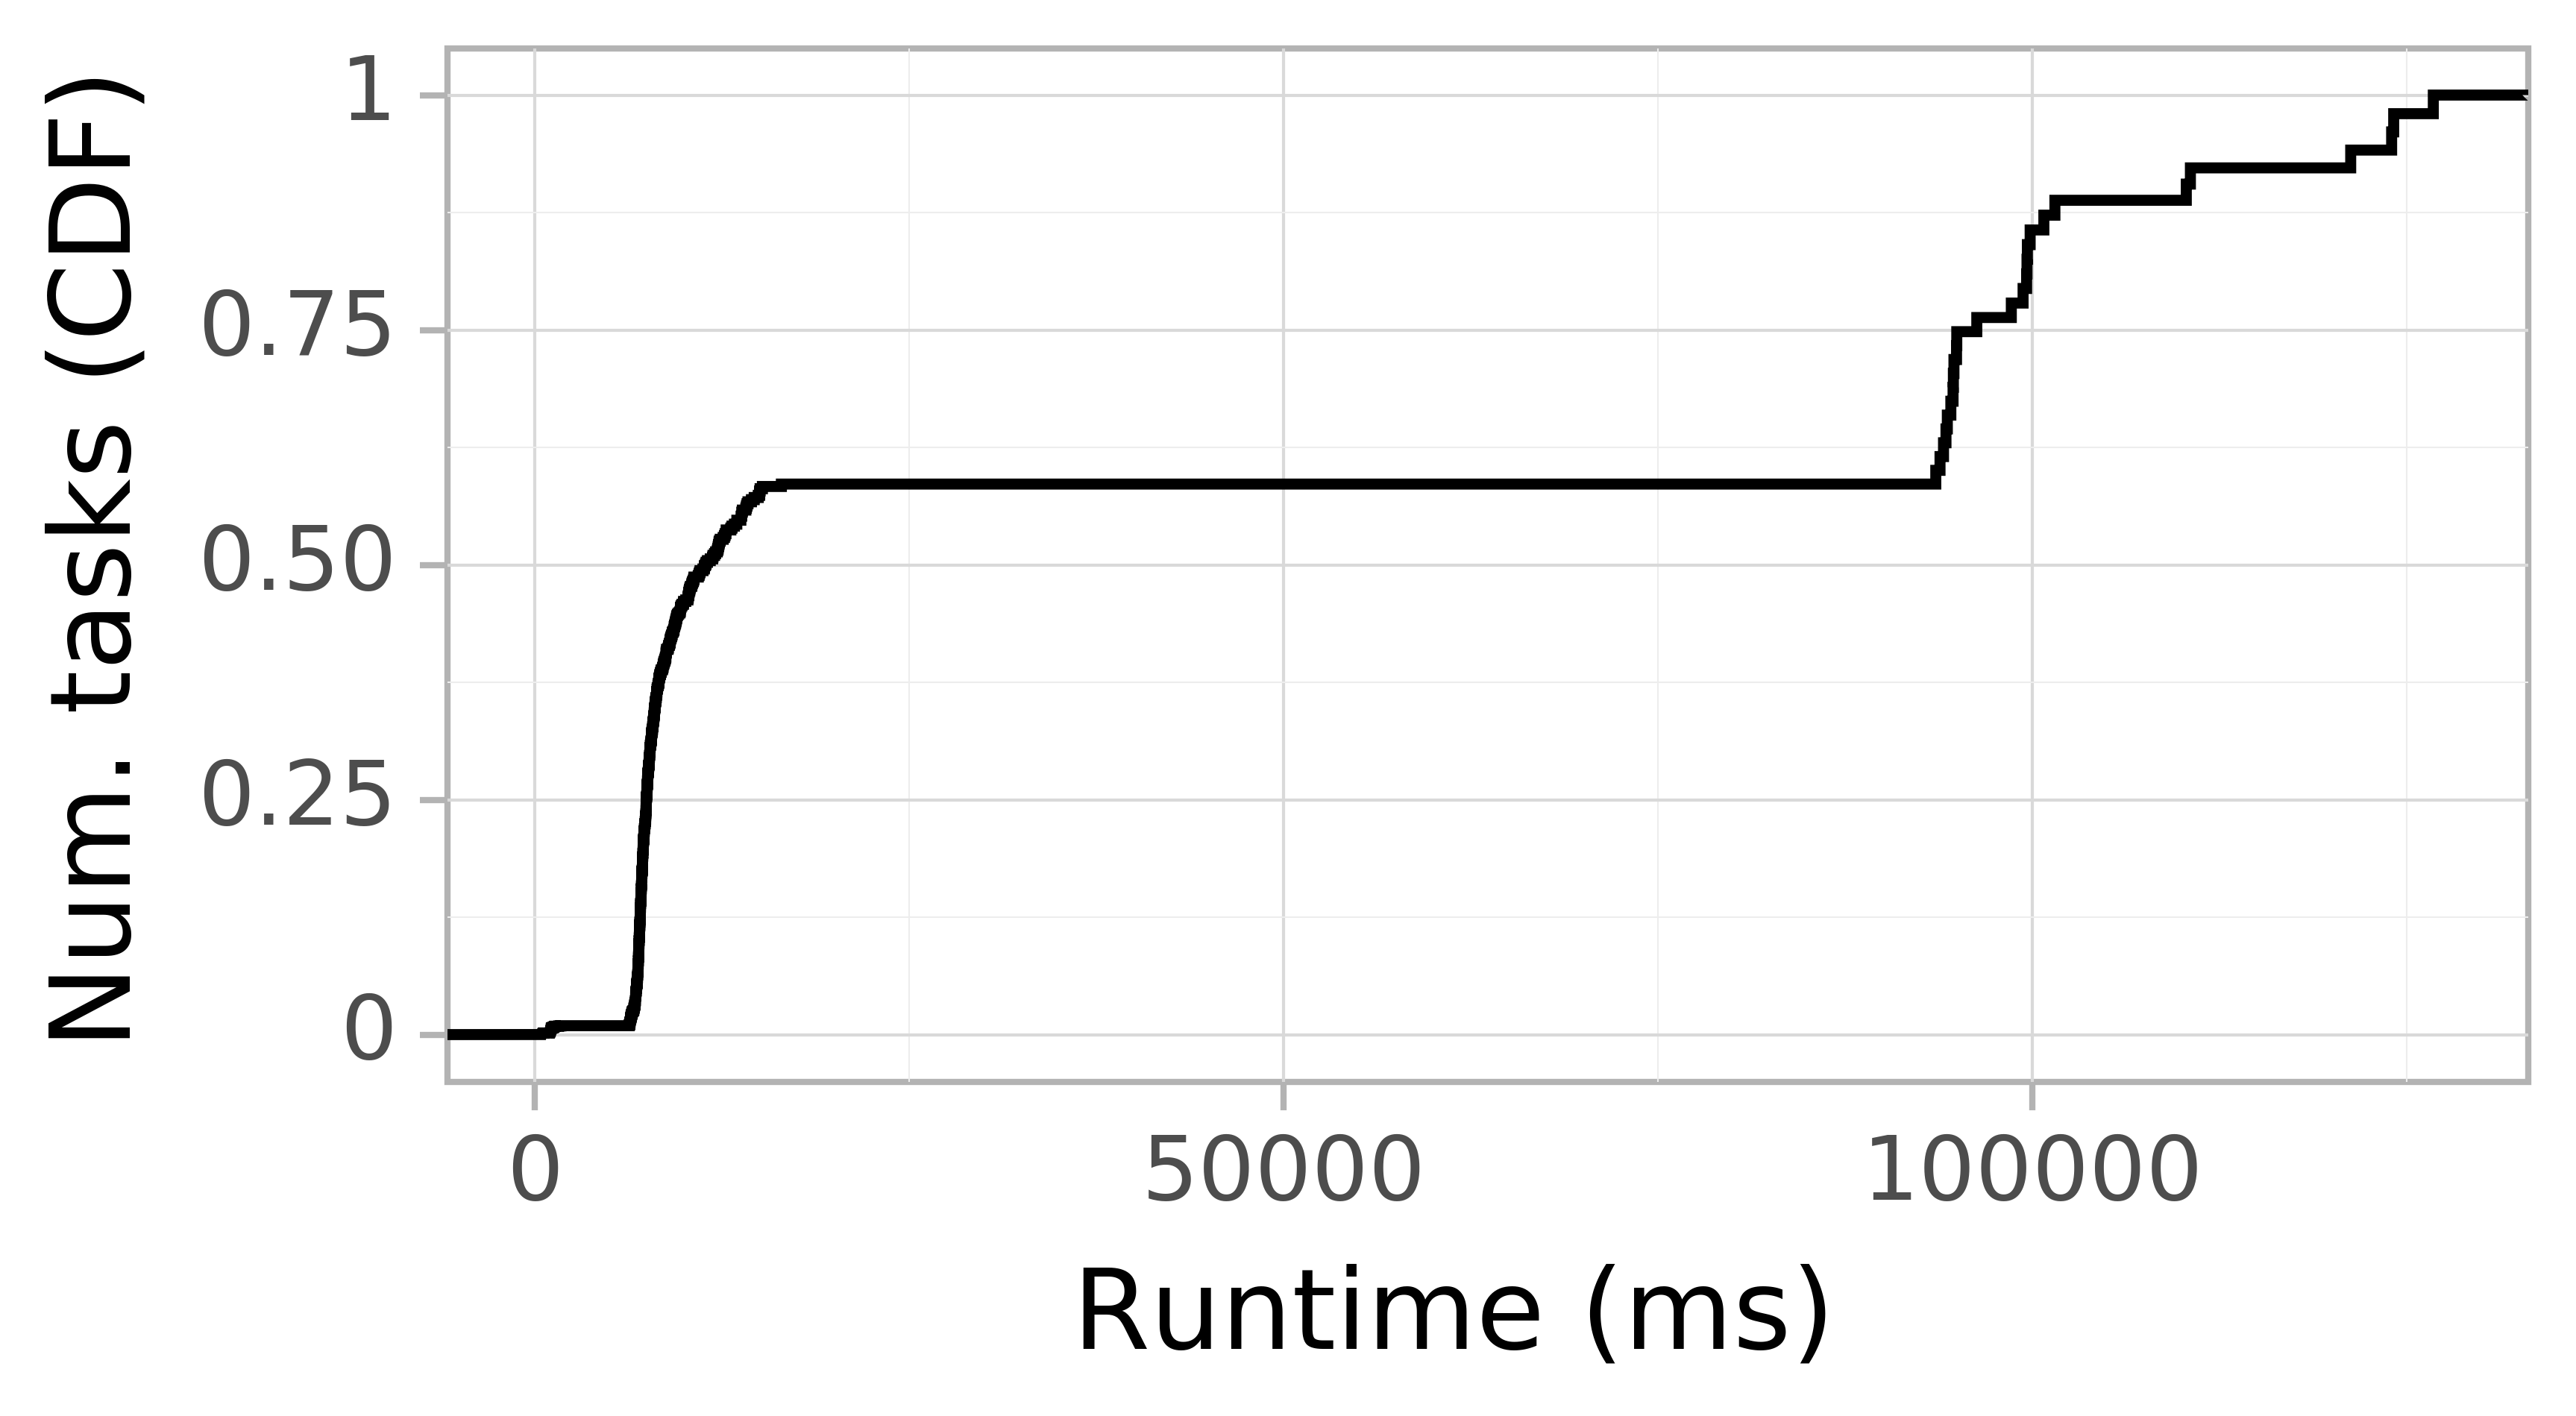 Task runtime CDF graph for the askalon-new_ee35 trace.